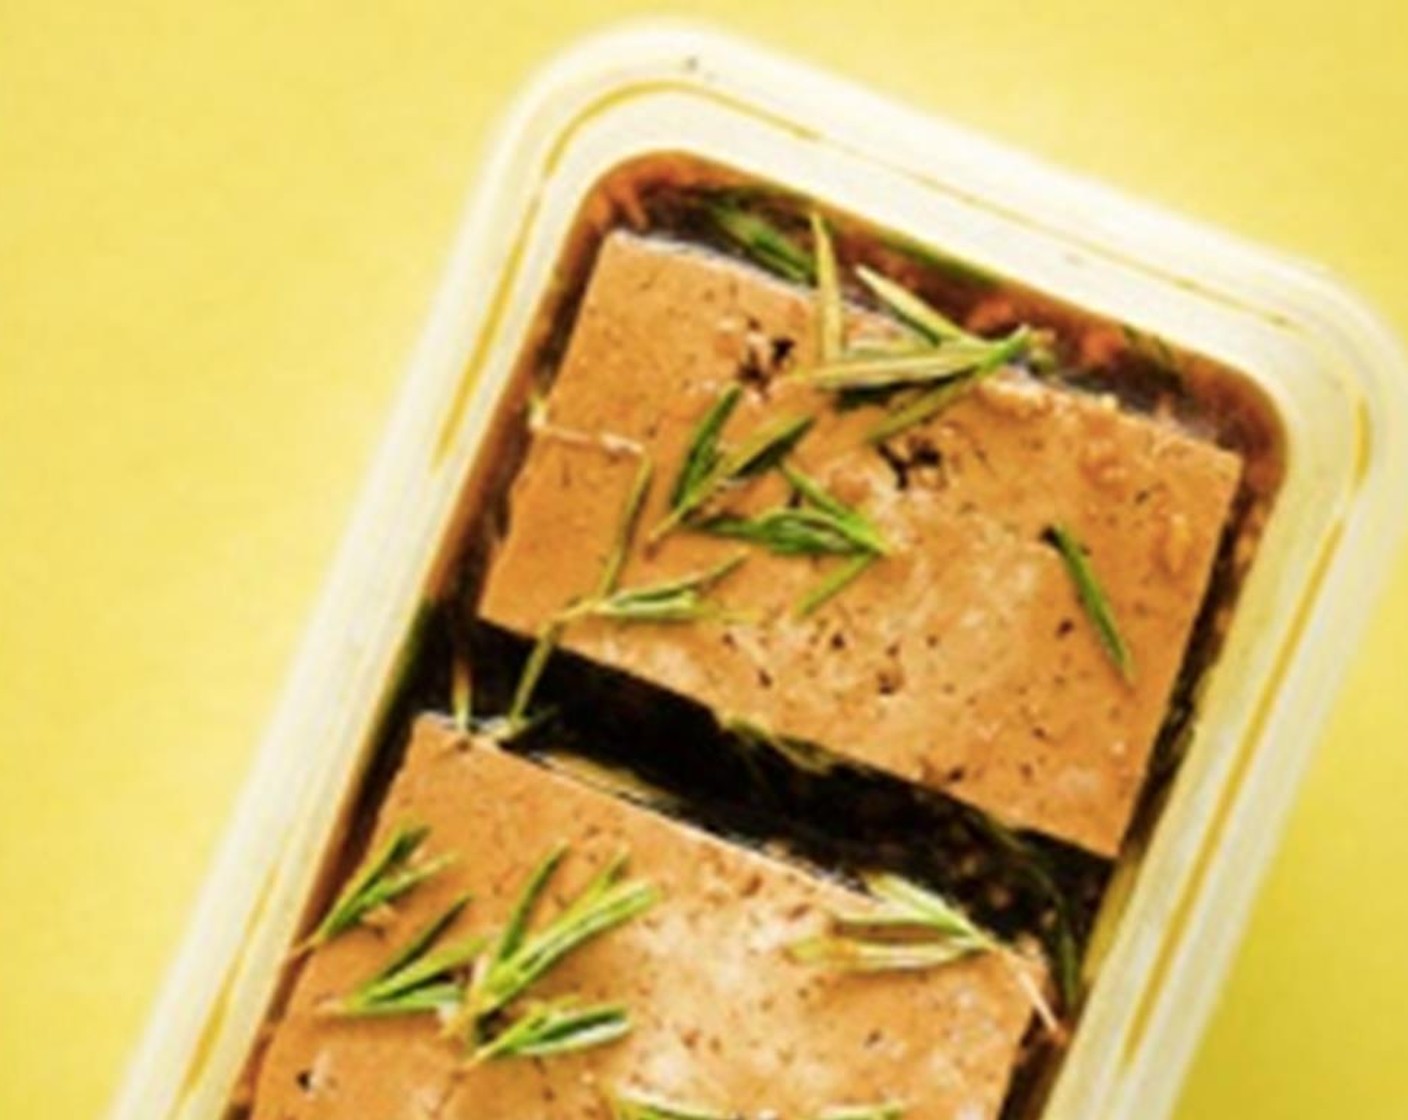 step 2 Combine Coffee (1 cup), Fresh Rosemary (2 sprigs), Garlic (2 cloves), Brown Sugar (2 Tbsp), Salt (1 tsp) and Ground Black Pepper (1/2 tsp). Place tofu in a sealable dish or ziploc bag, then pour in the marinade. Set in fridge for anywhere from 30 minutes to 6 hours.